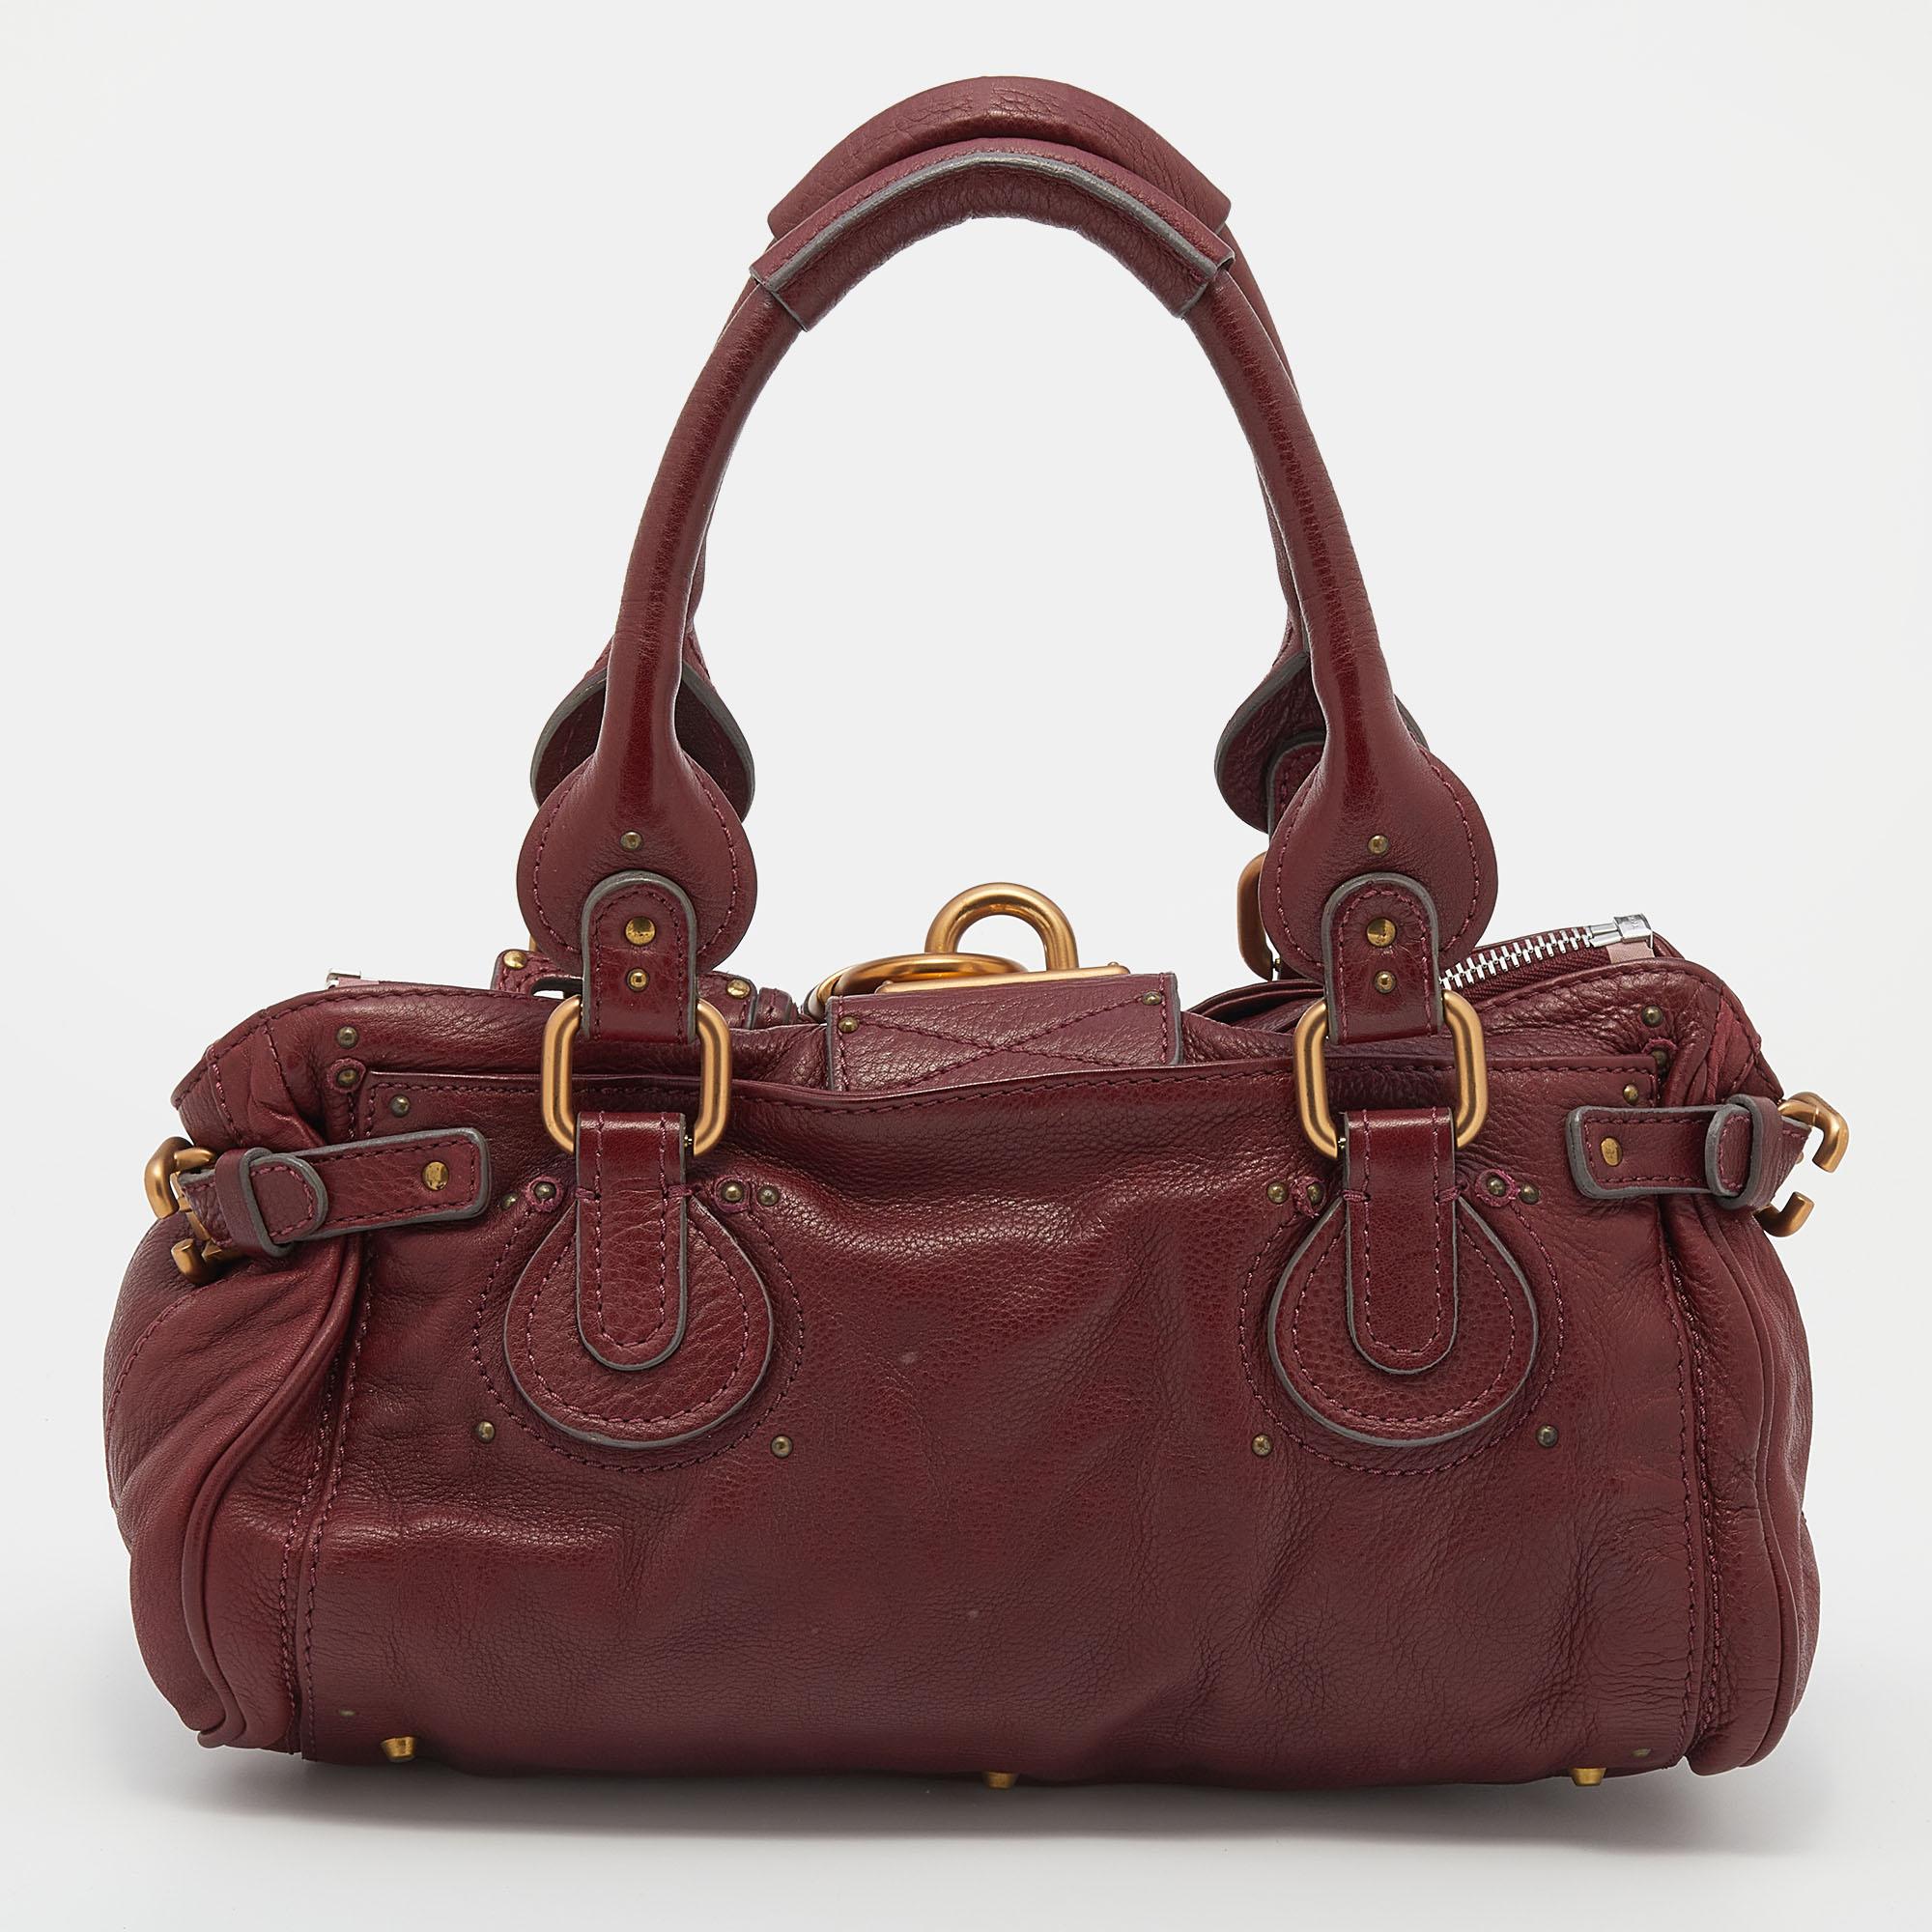 This Chloe Paddington satchel is built to assist your impeccable style on all days. Gold-tone hardware with a chunky lock on the front easily attracts all the attention. The crimson red leather has an interesting texture while the fabric interior is